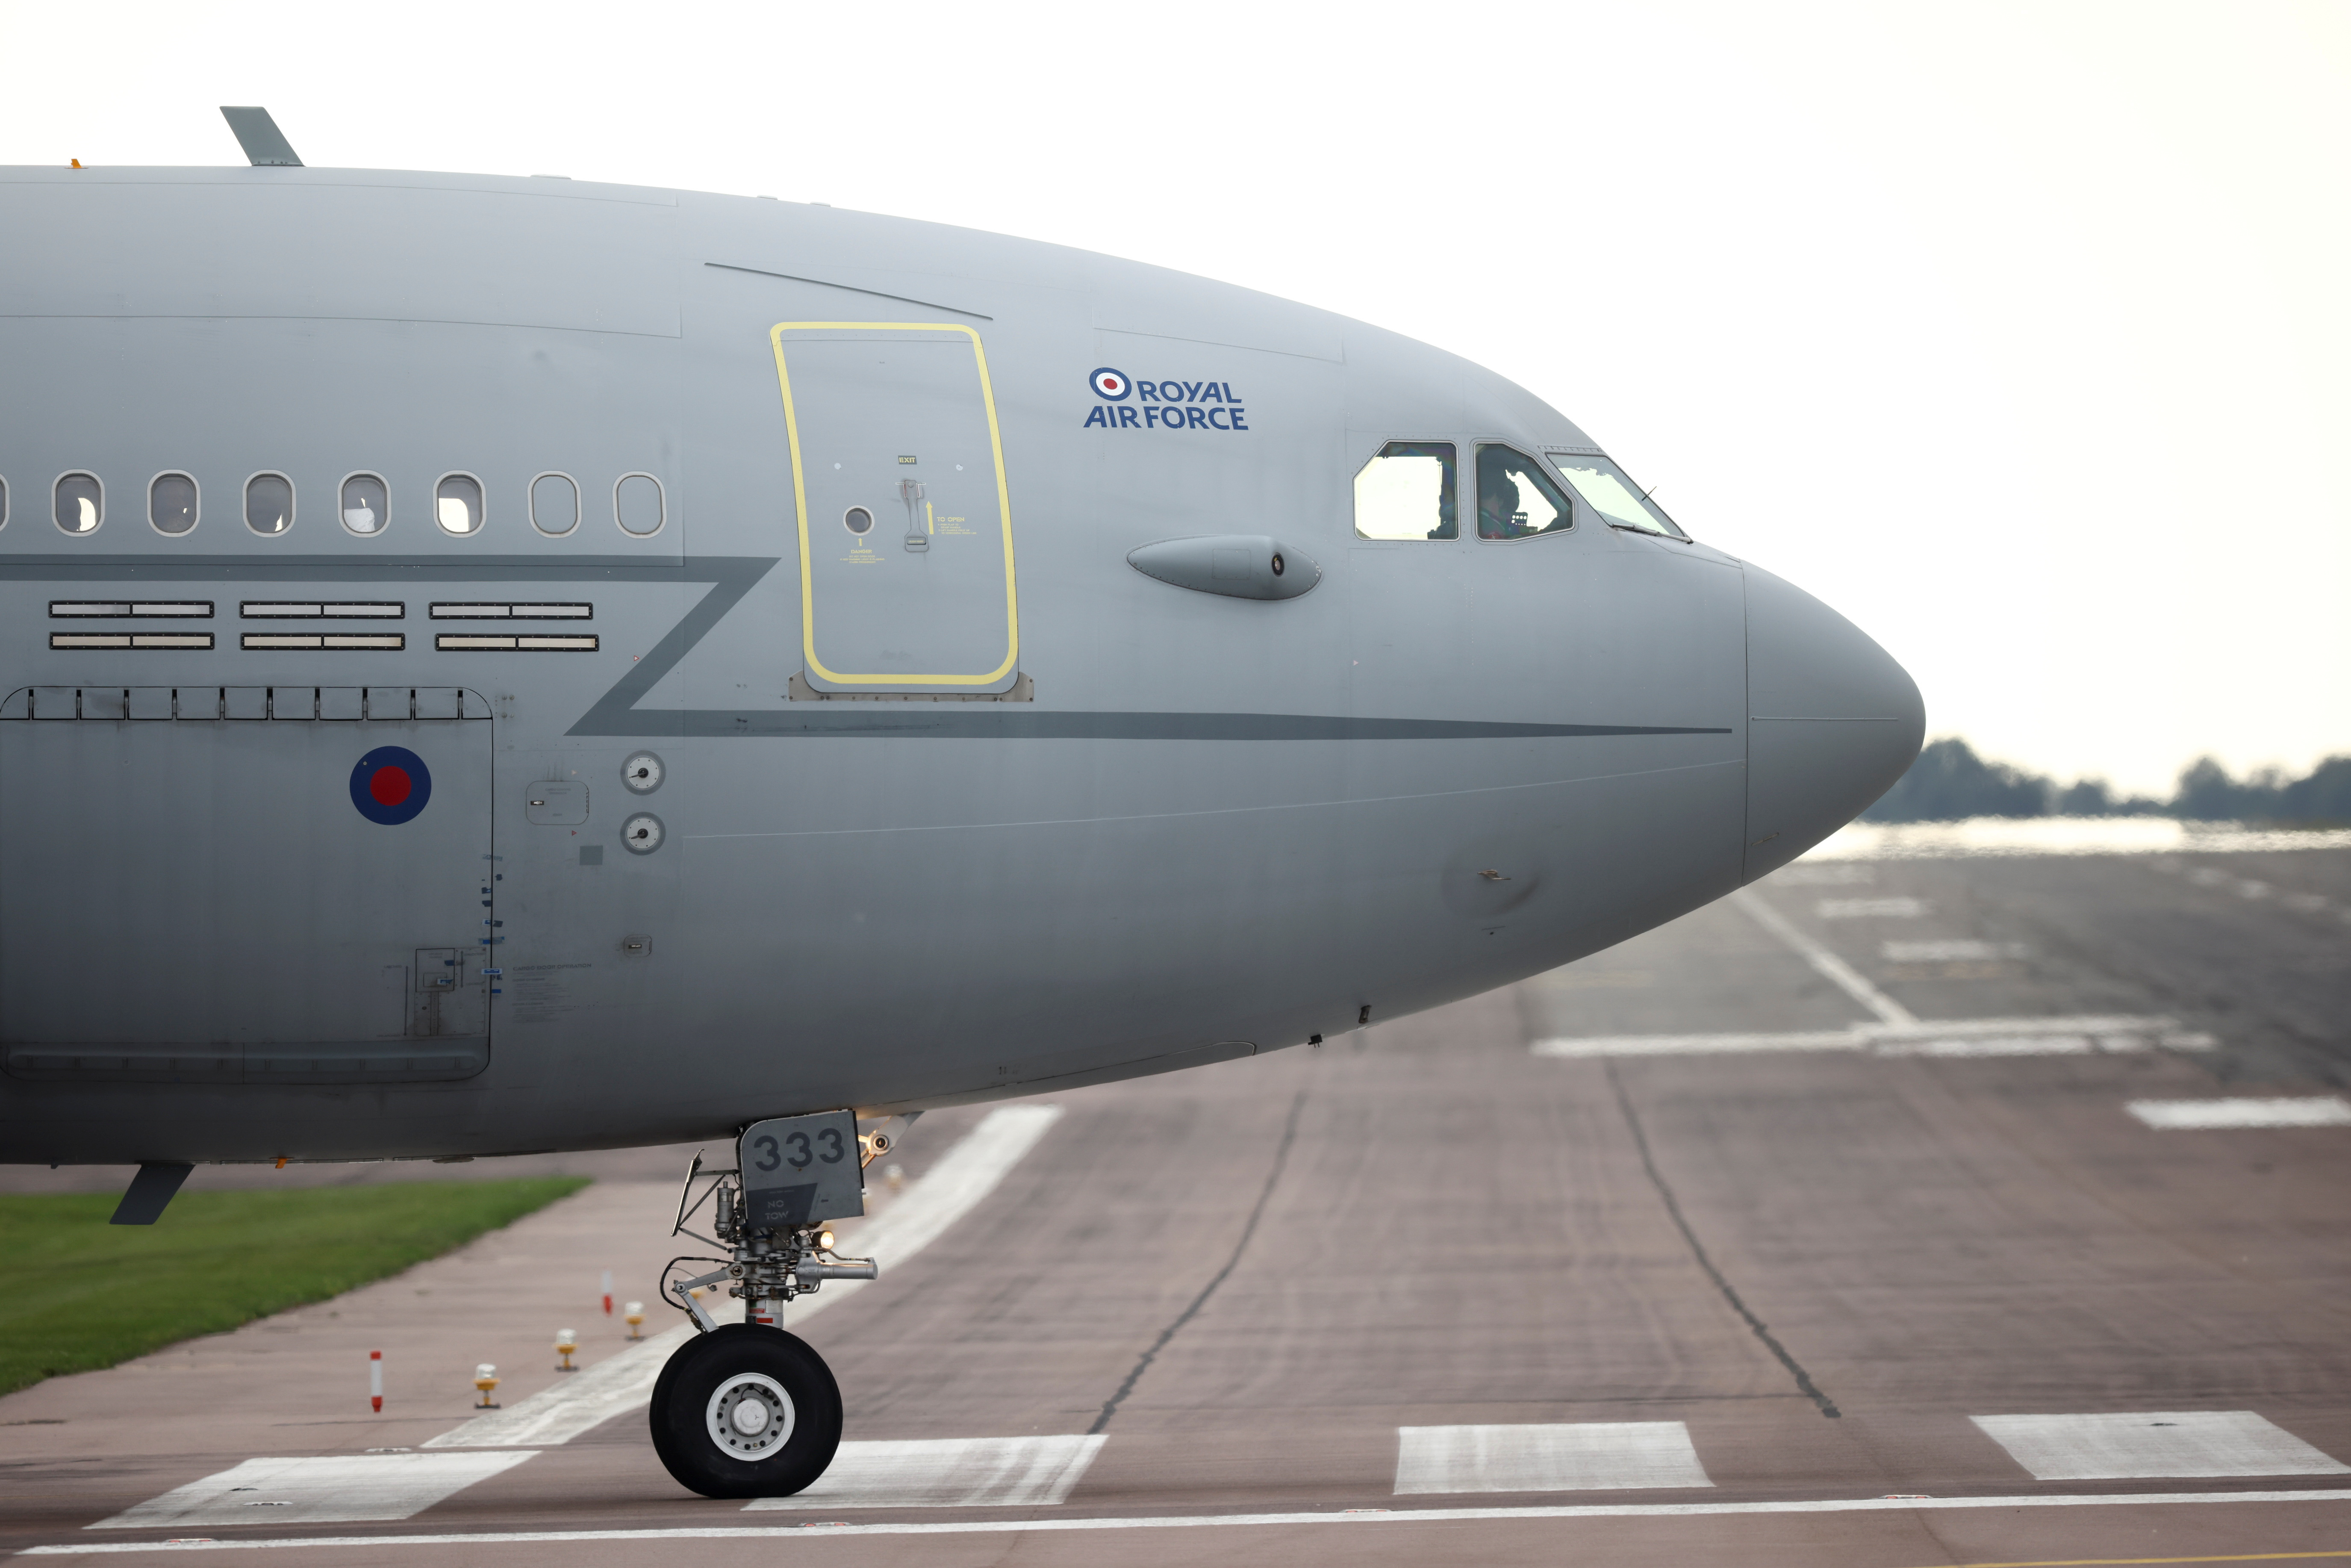 A RAF Voyager plane carrying military personnel prepares to take off at the RAF Brize Norton in Oxfordshire